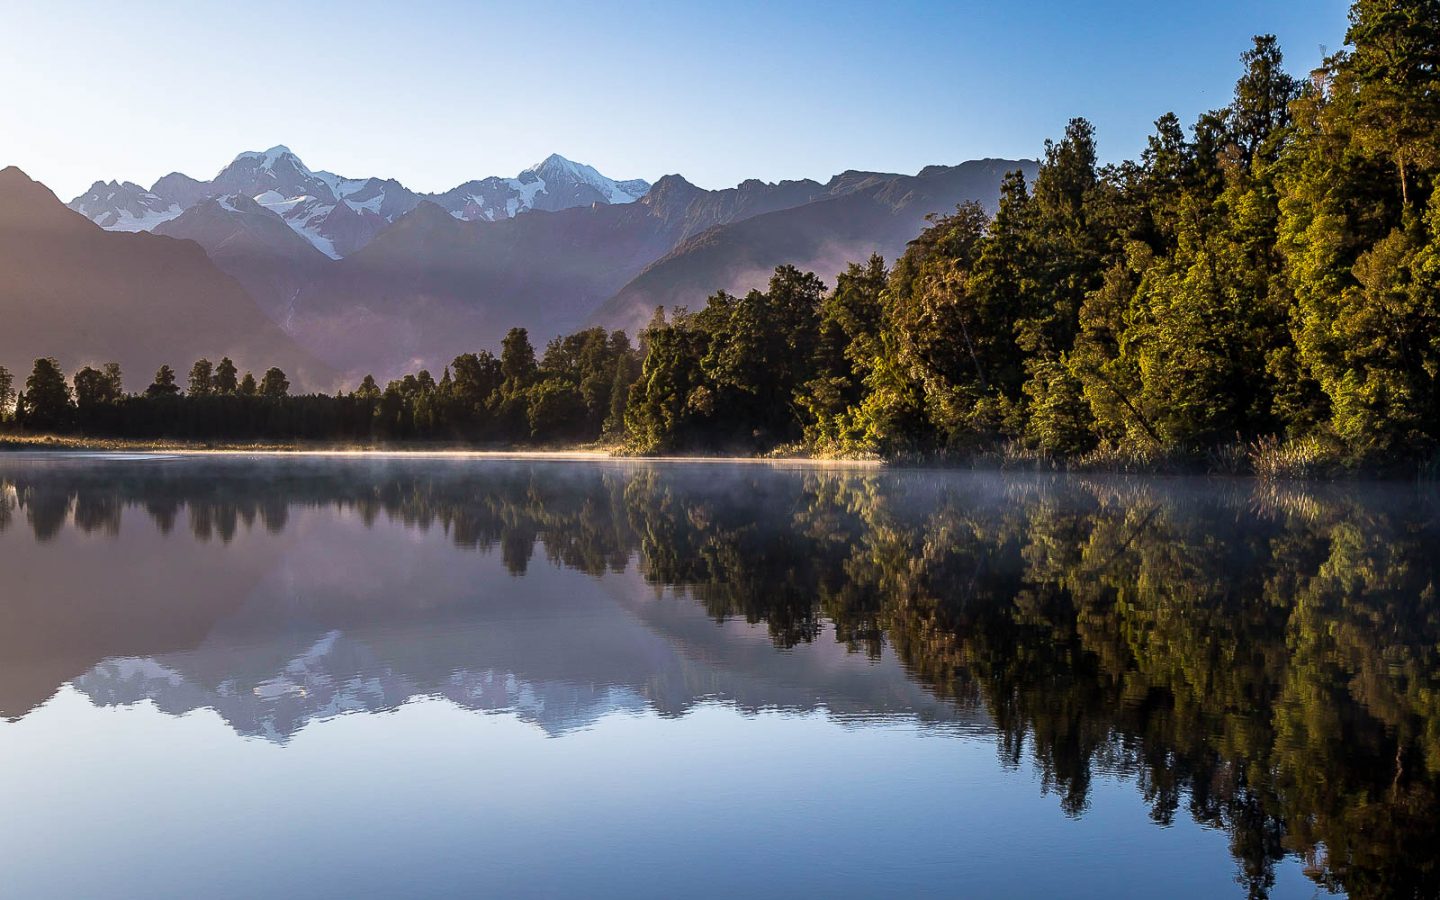 Reflection of Mt. Cook on Lake Matheson, South Island, New Zealand